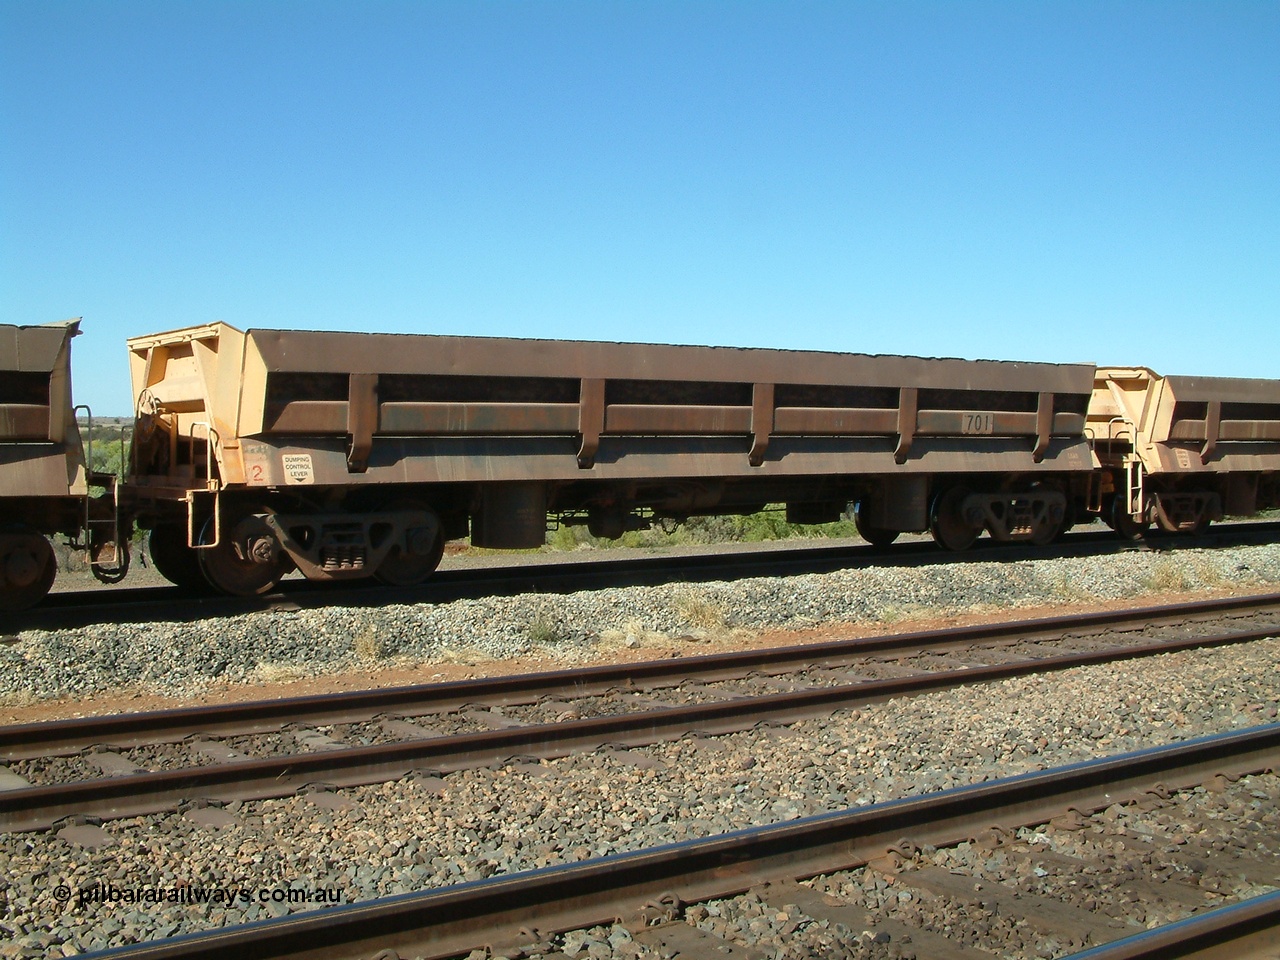 040810 144845
Shaw Siding backtrack, built by Difco Ohio USA in 1971, long side dump waggon 701, one of four such waggons built for Mt Newman.
Keywords: Difco-Ohio-USA;BHP-ballast-waggon;